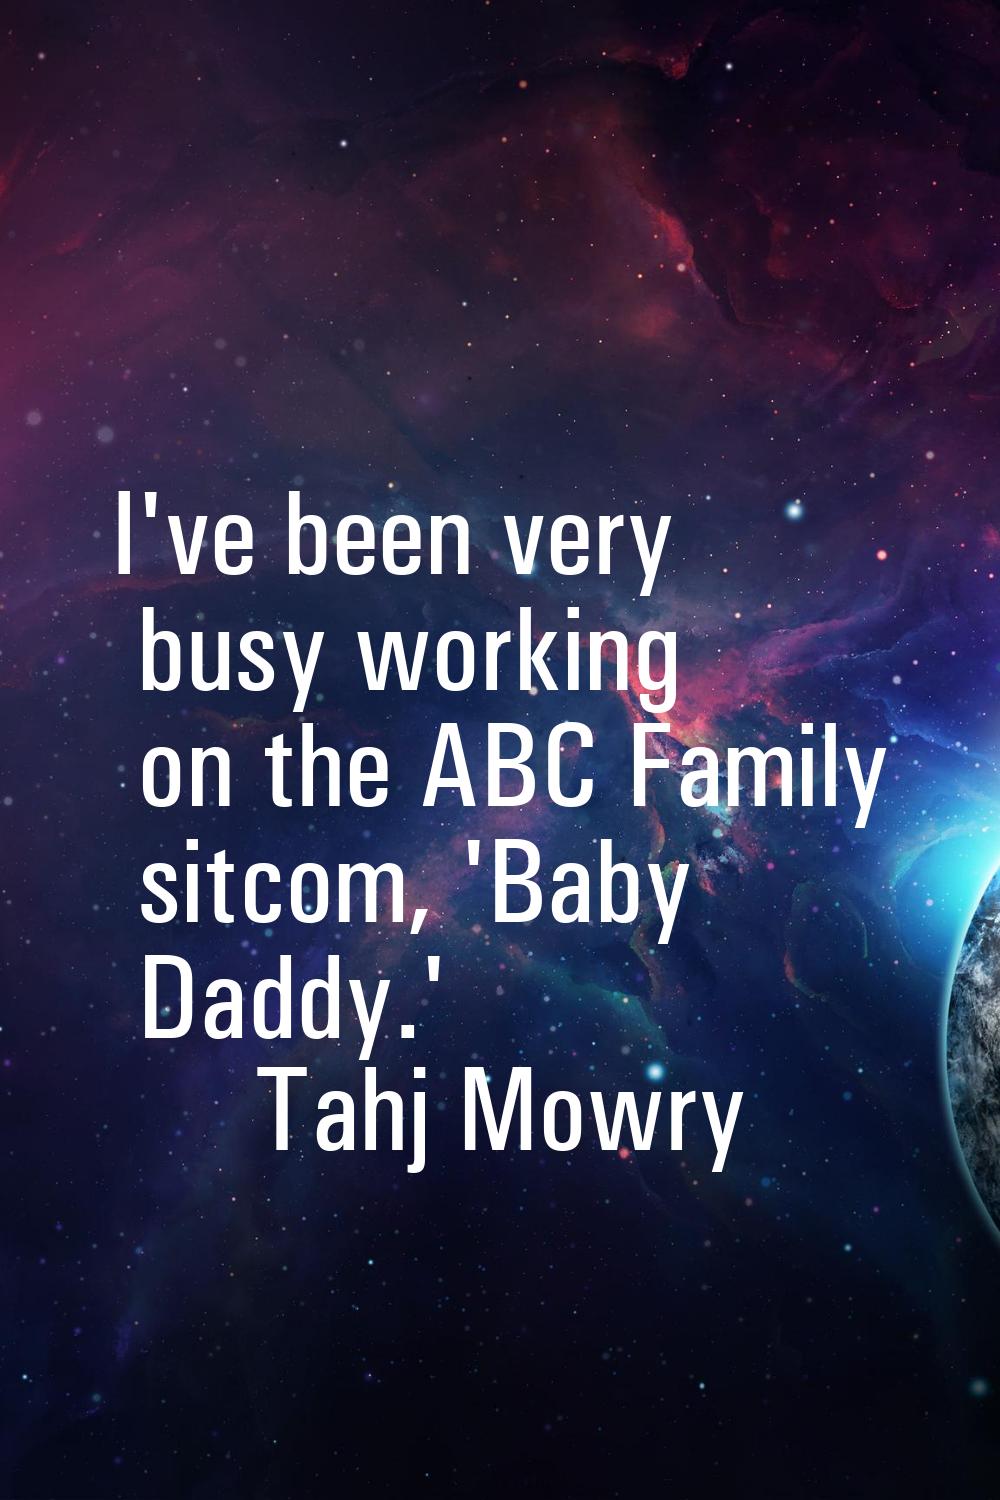 I've been very busy working on the ABC Family sitcom, 'Baby Daddy.'